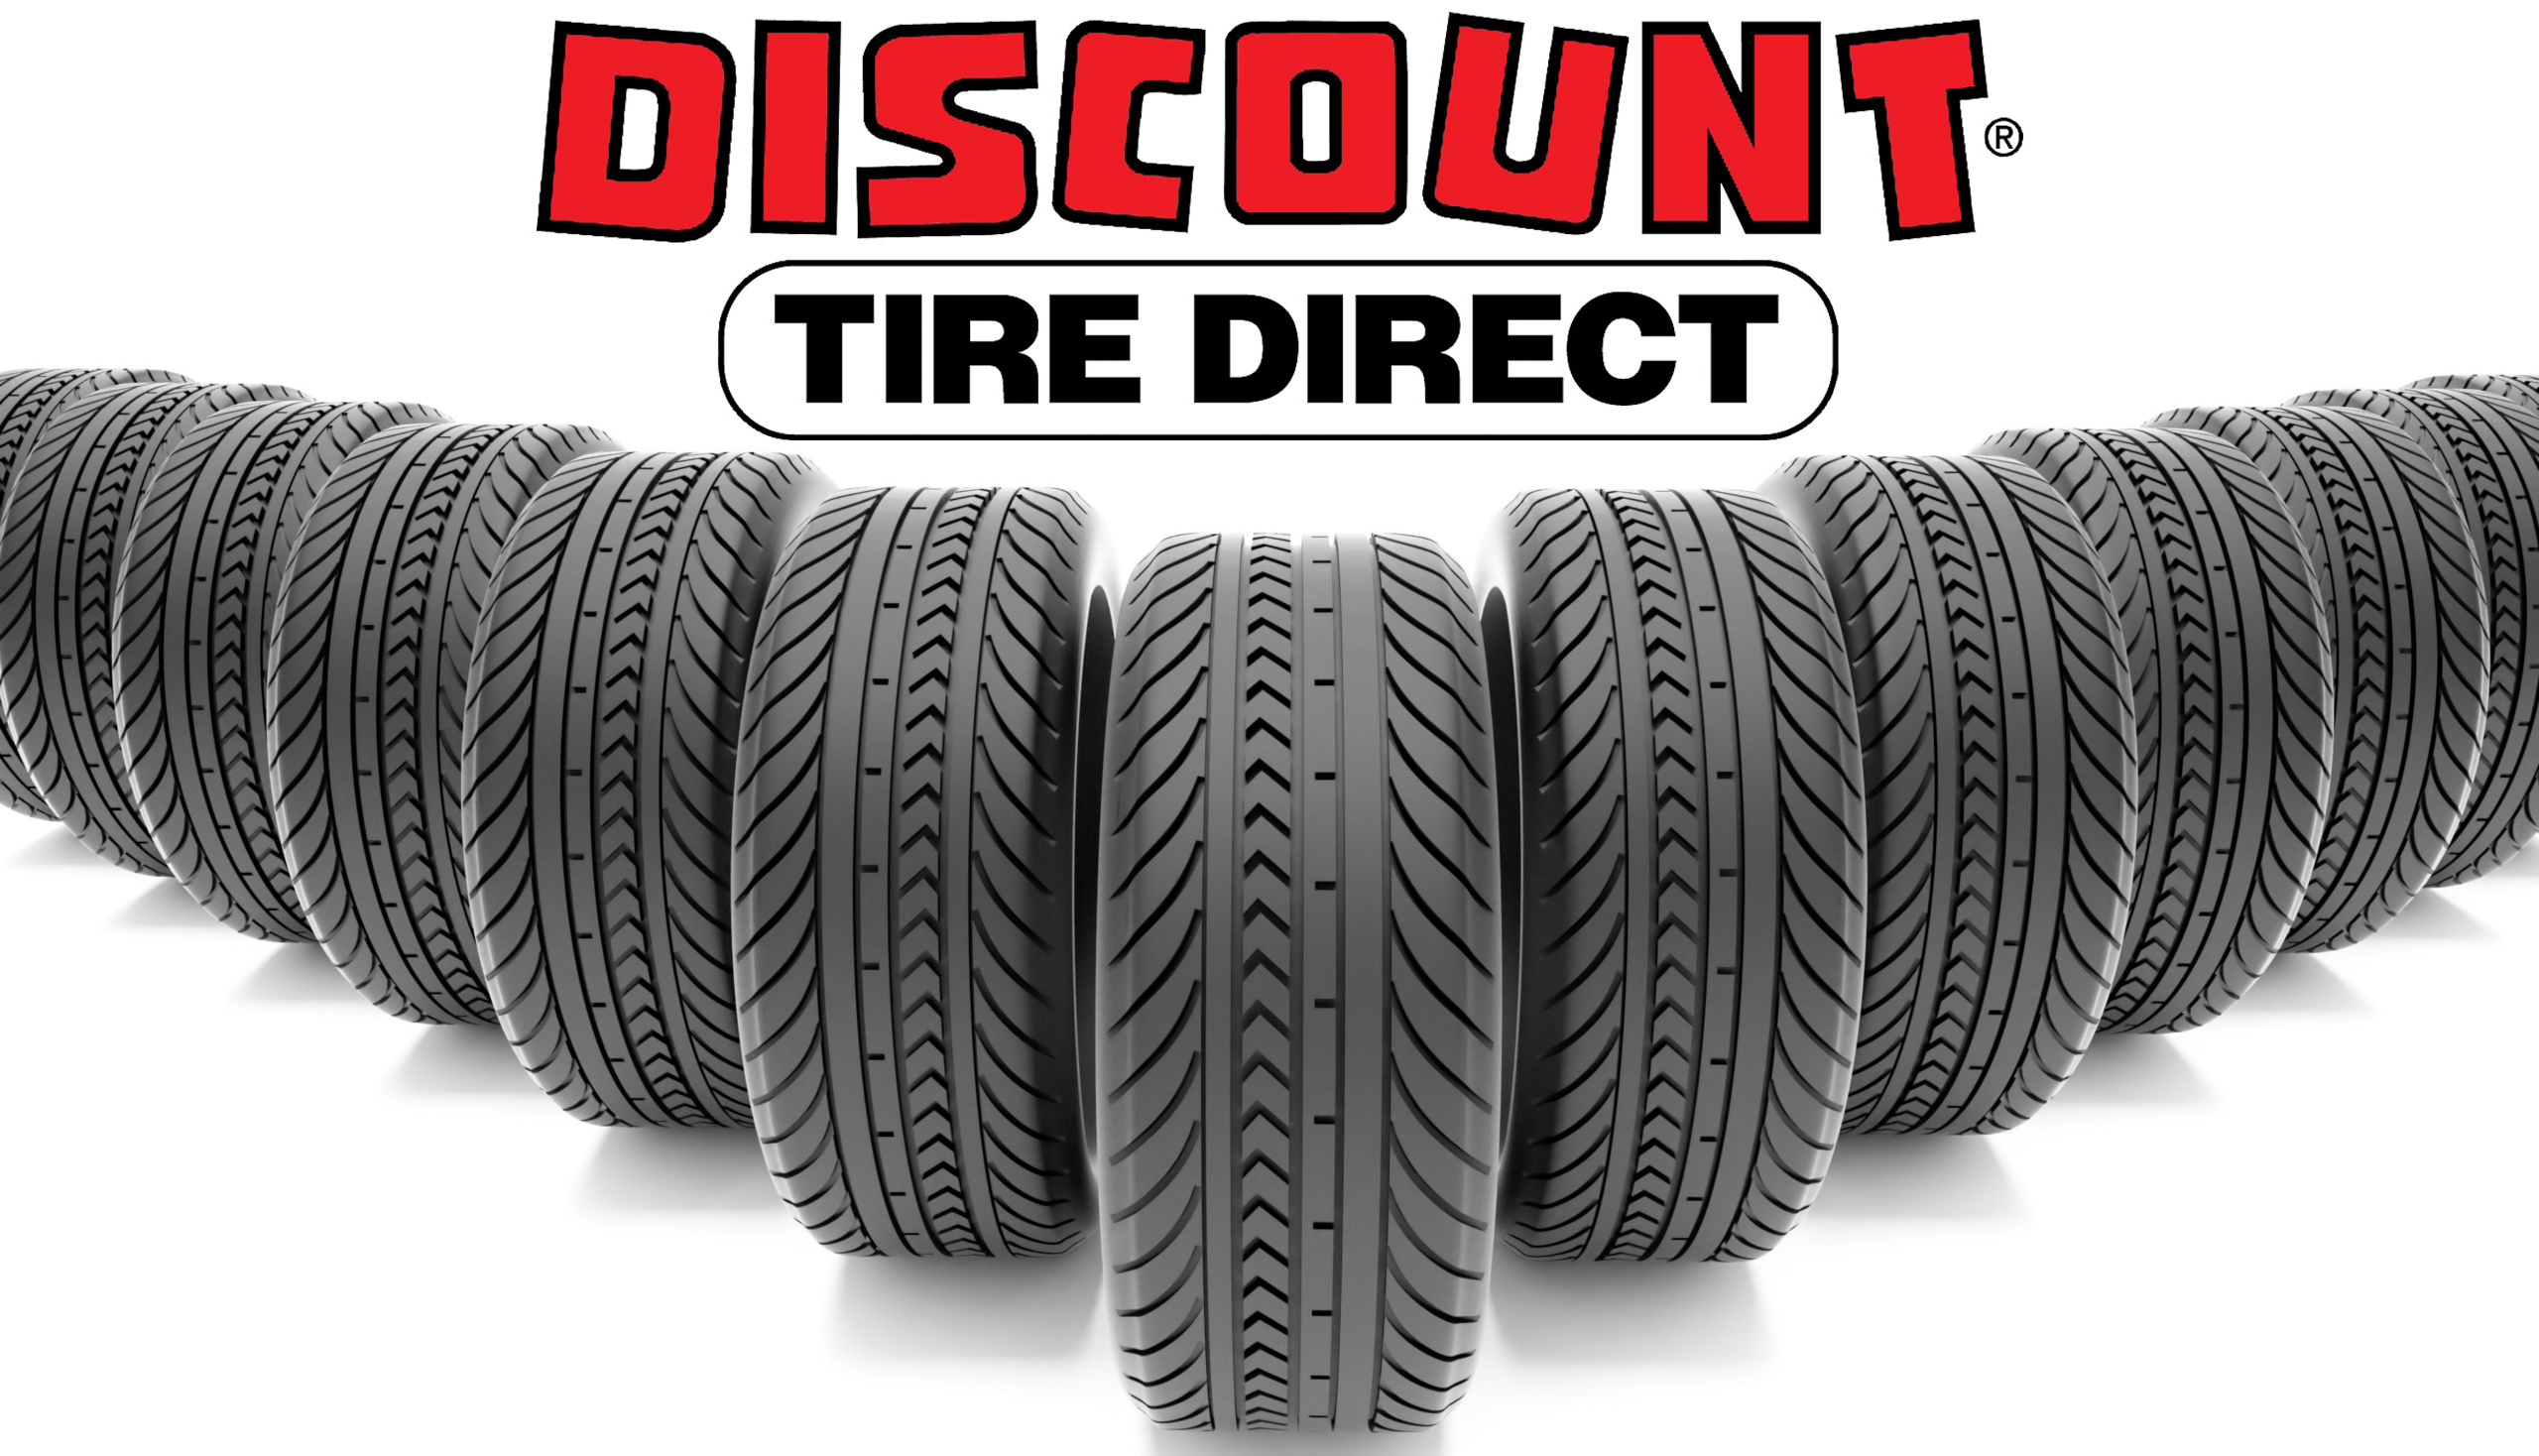 Discount Tire Direct Memorial Day Sale w/ Up to 320 in Rebates Free